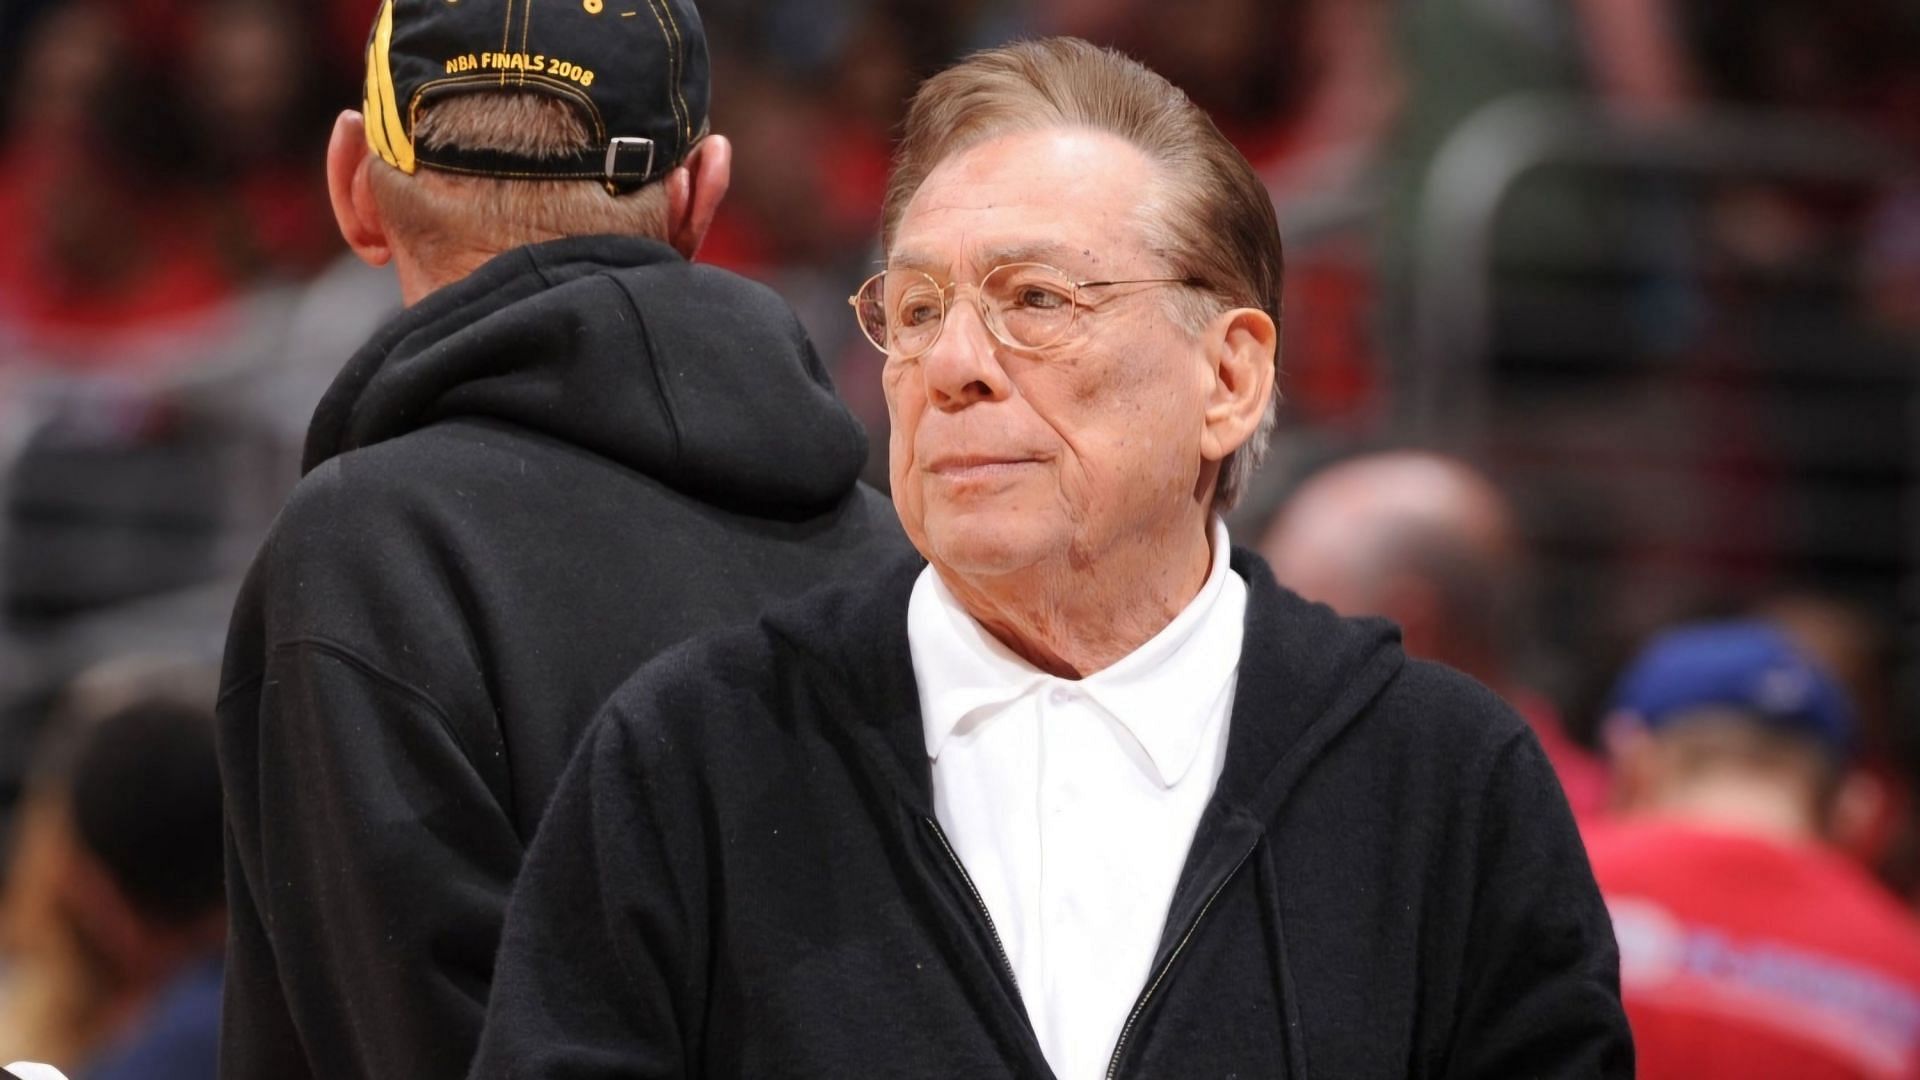 Donald Sterling at an NBA playoffs game in 2012